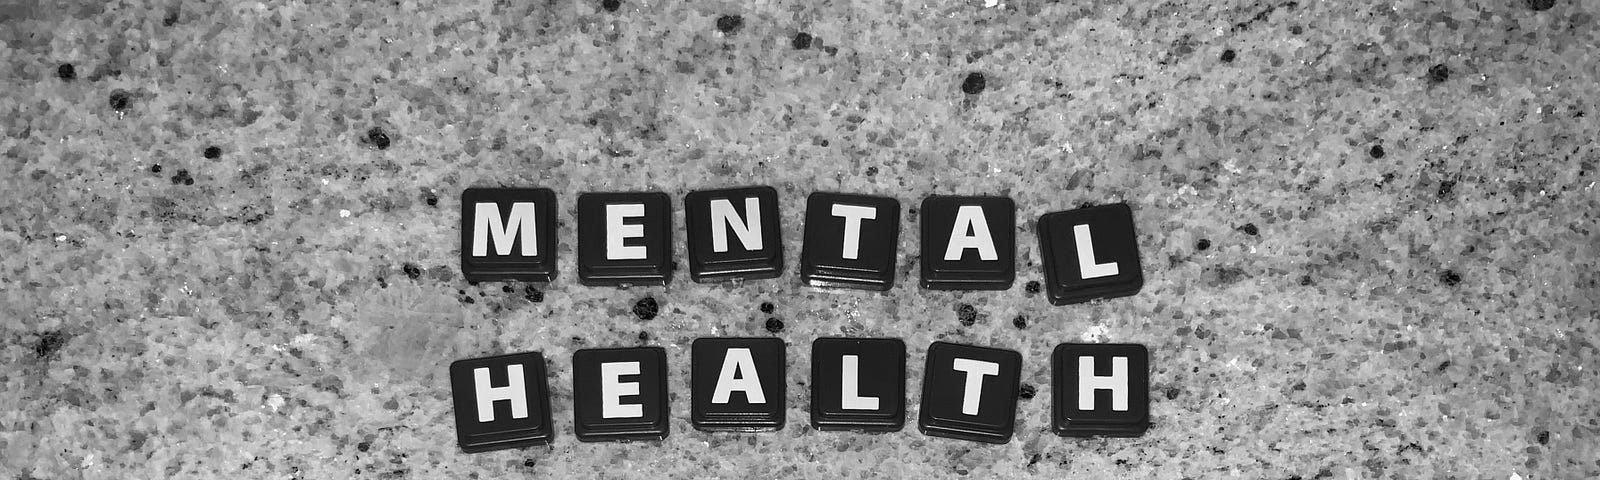 Mental health matters is spelled out in Scrabble letters.